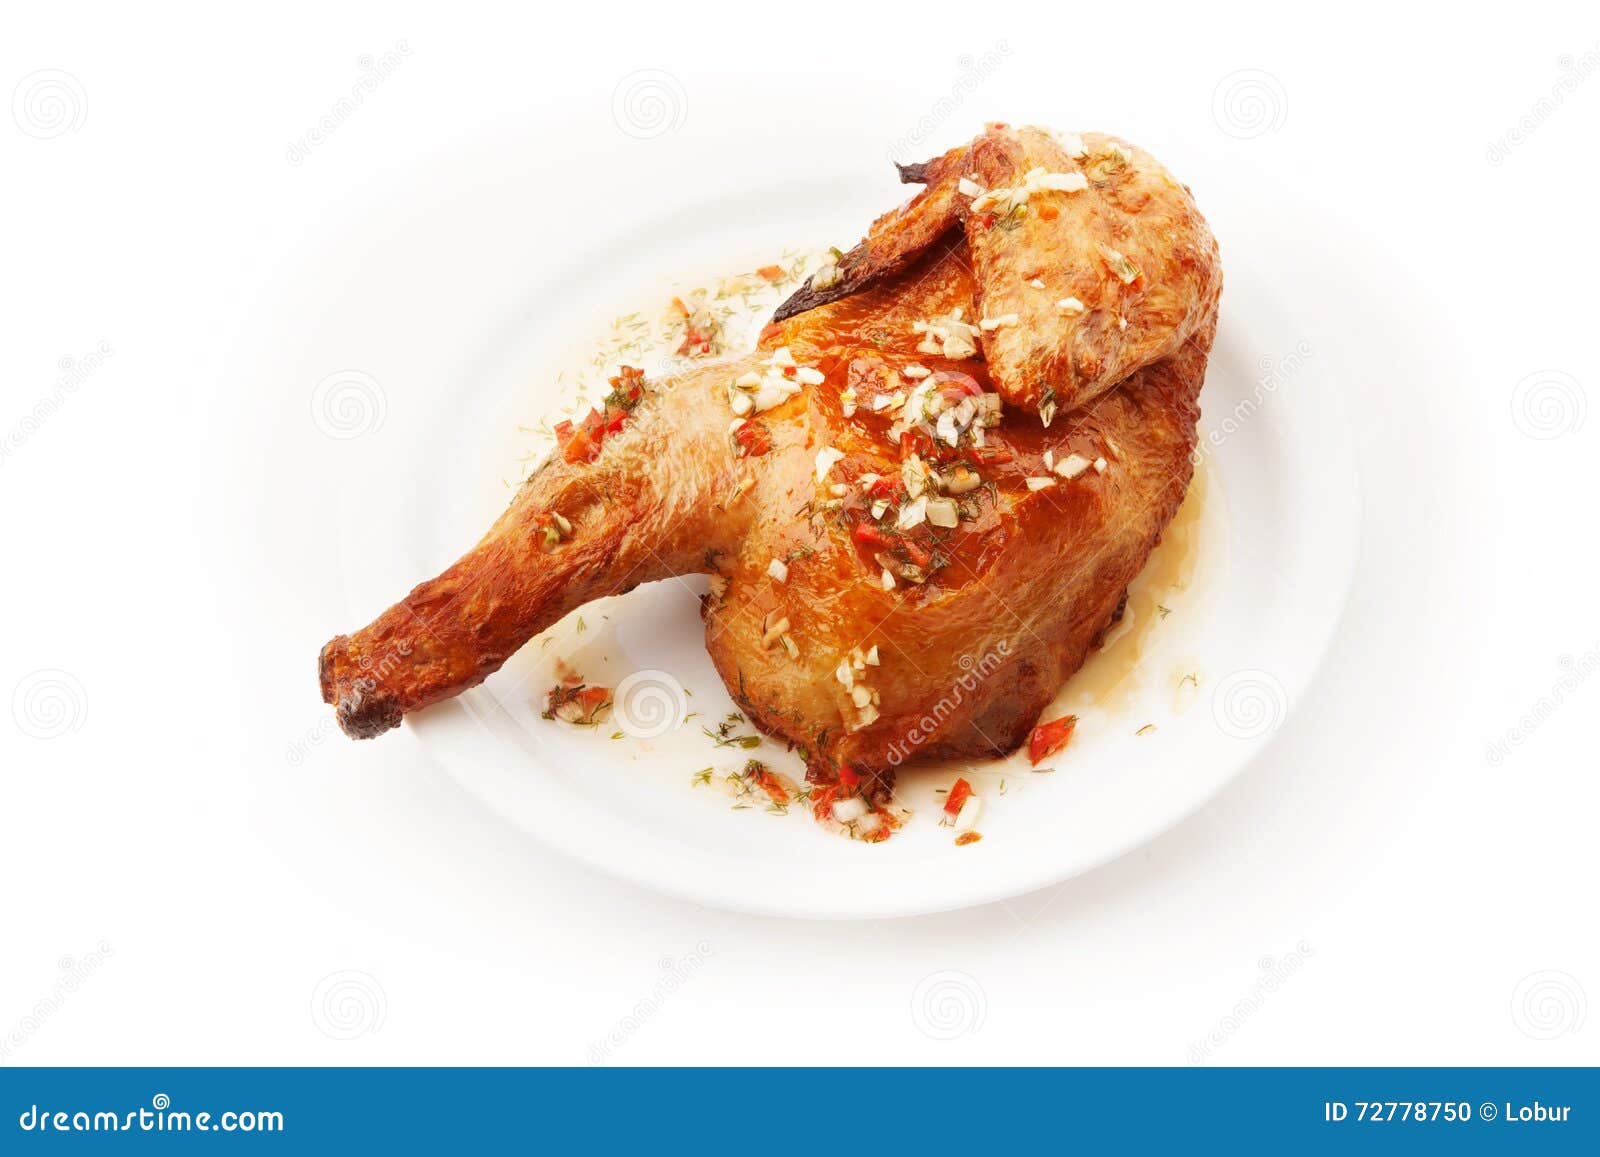 grilled chiken on white background